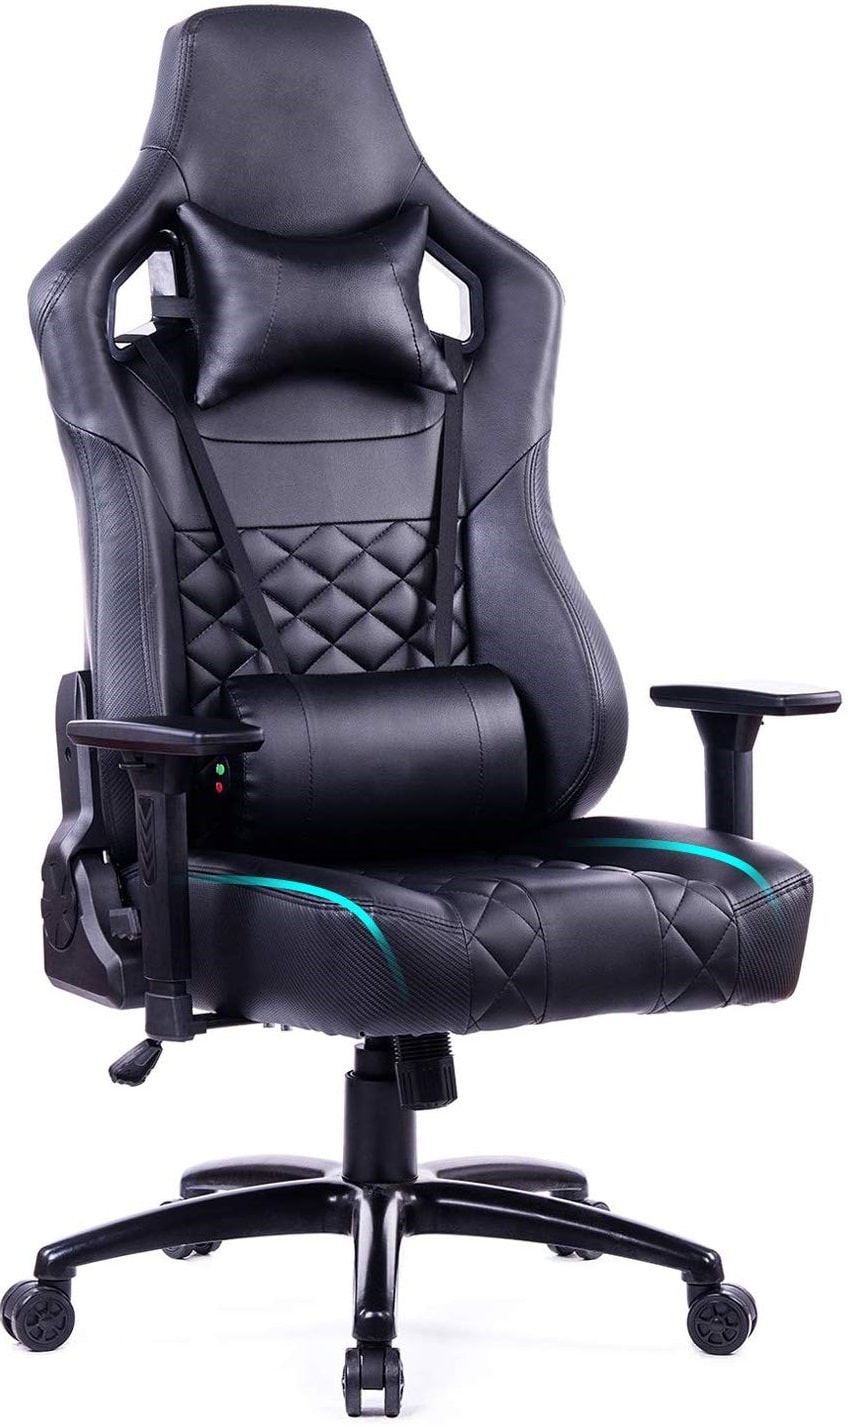 Blue Whale Big and Tall Gaming Chair